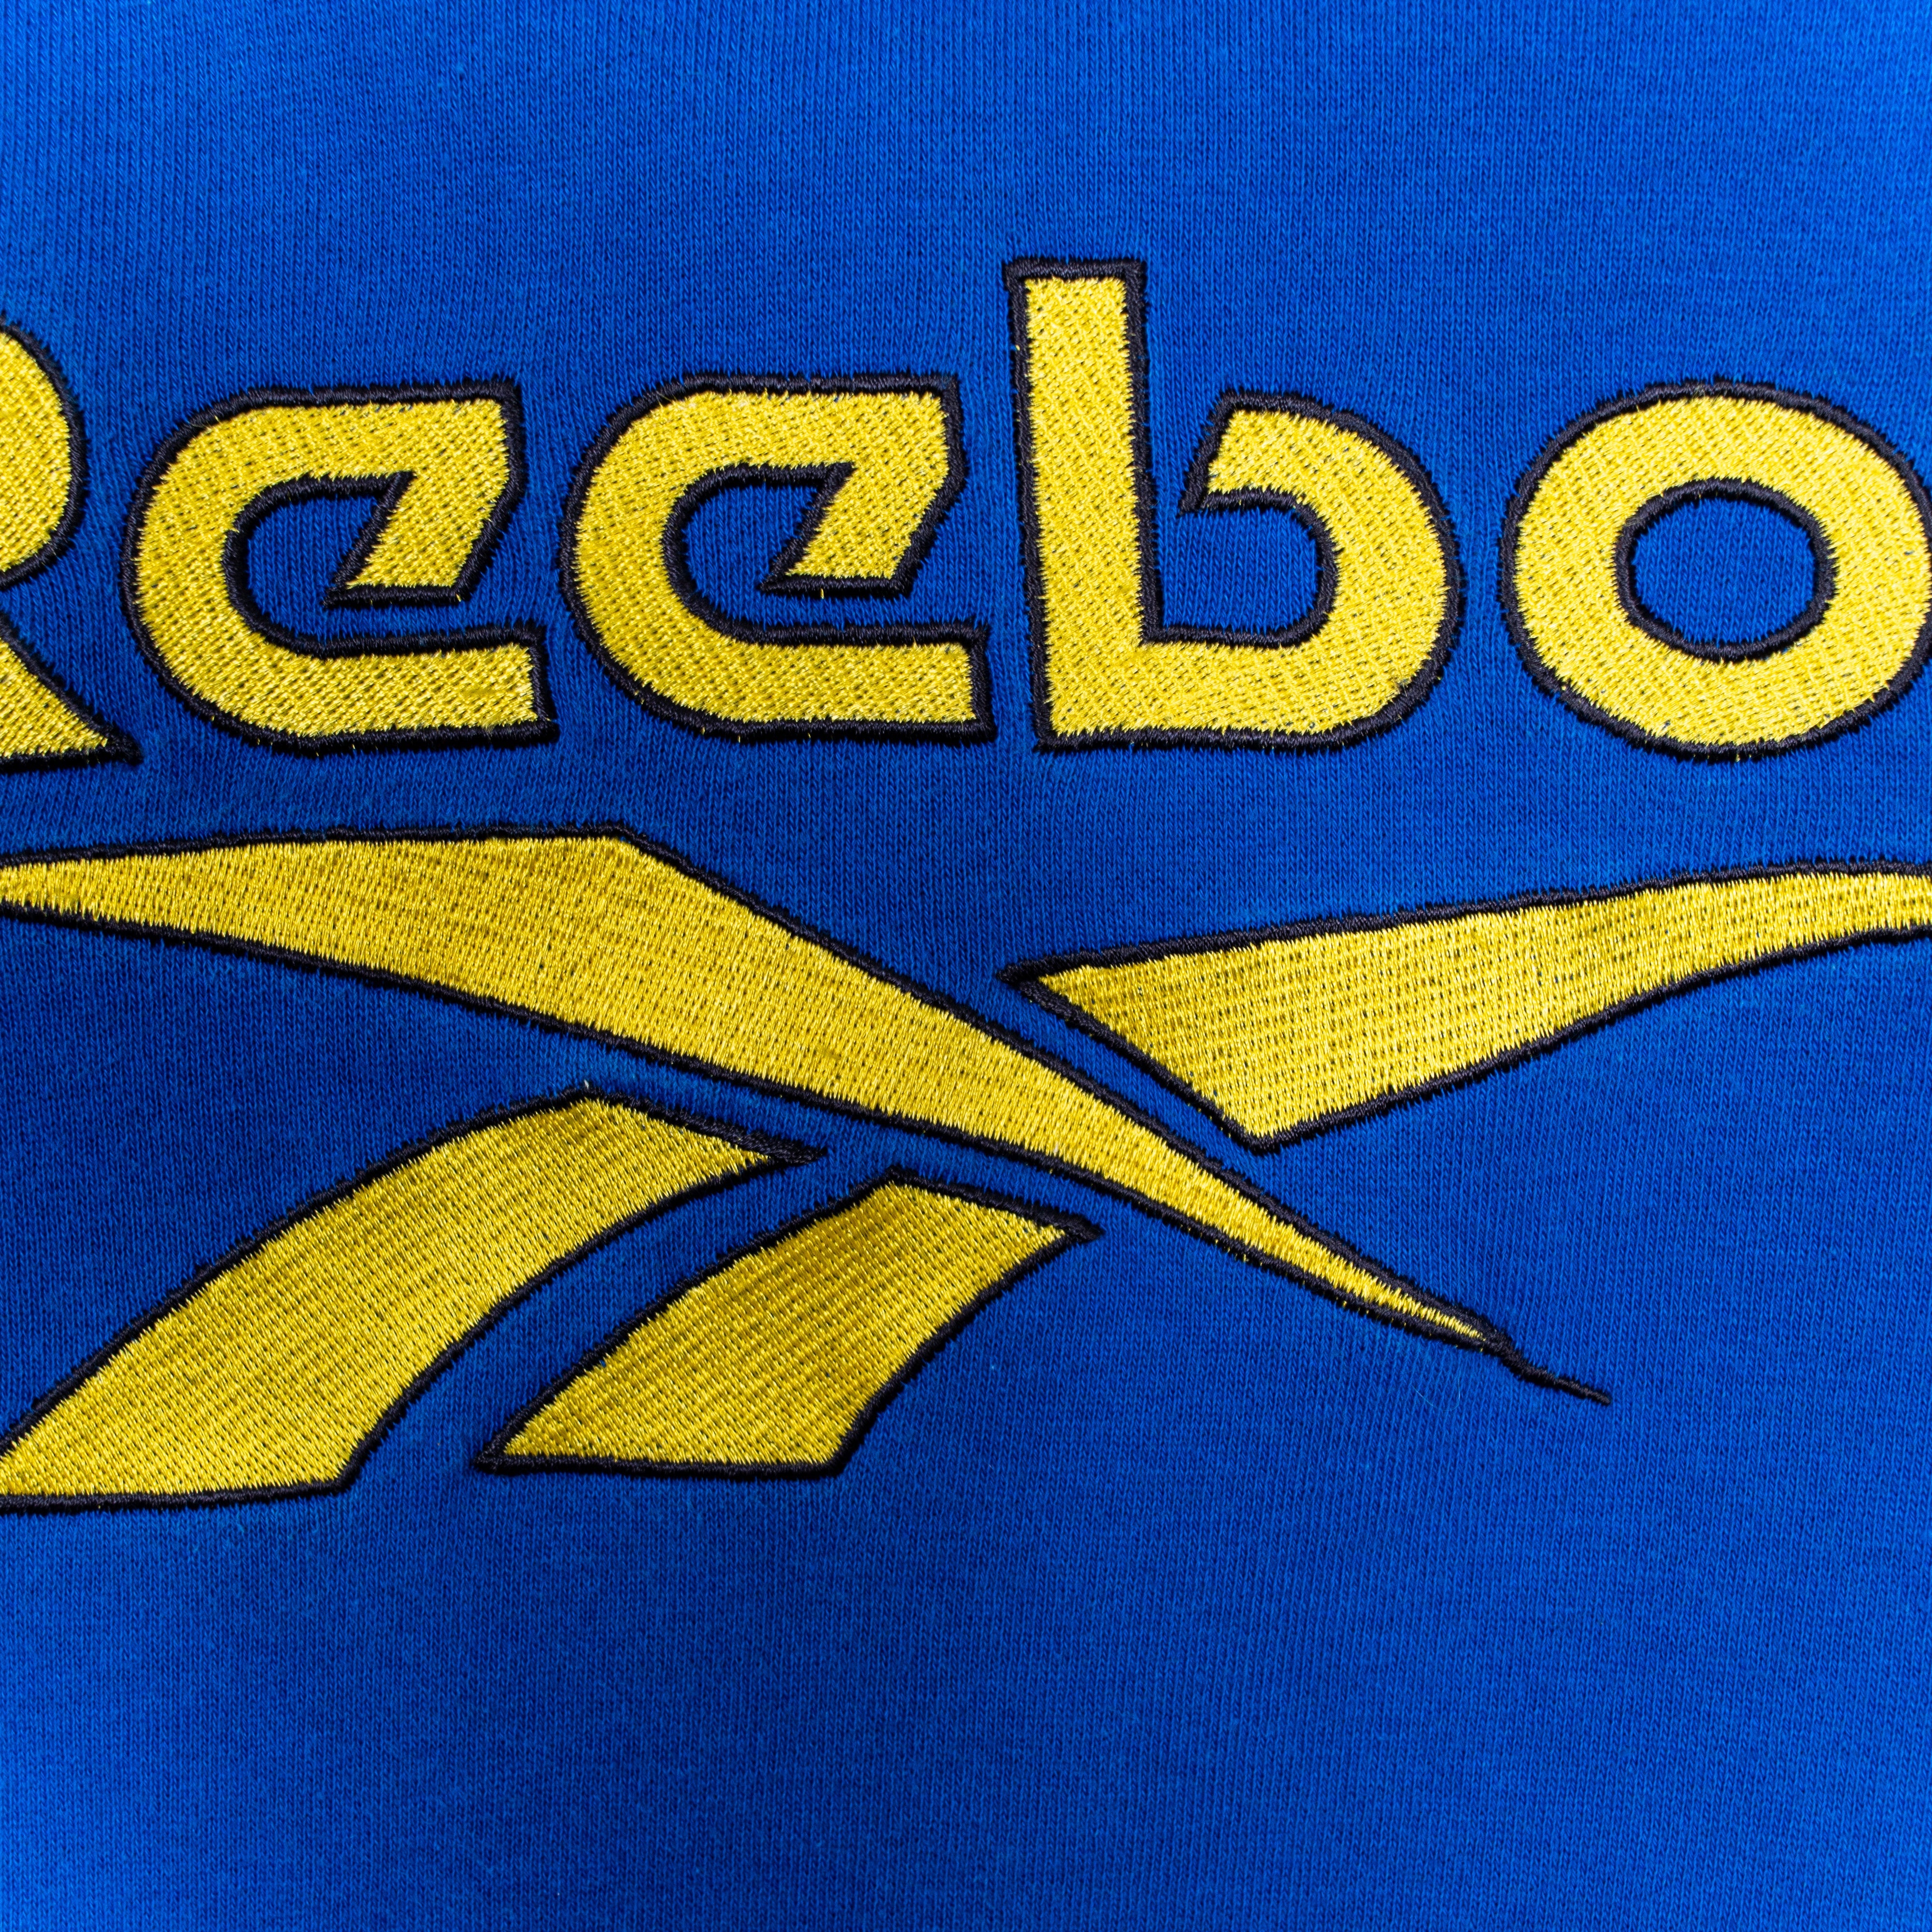 Reebok Big Yellow Front Logo Embroidery Vintage Striped Detail Blue Oversized Hoodie Men's M